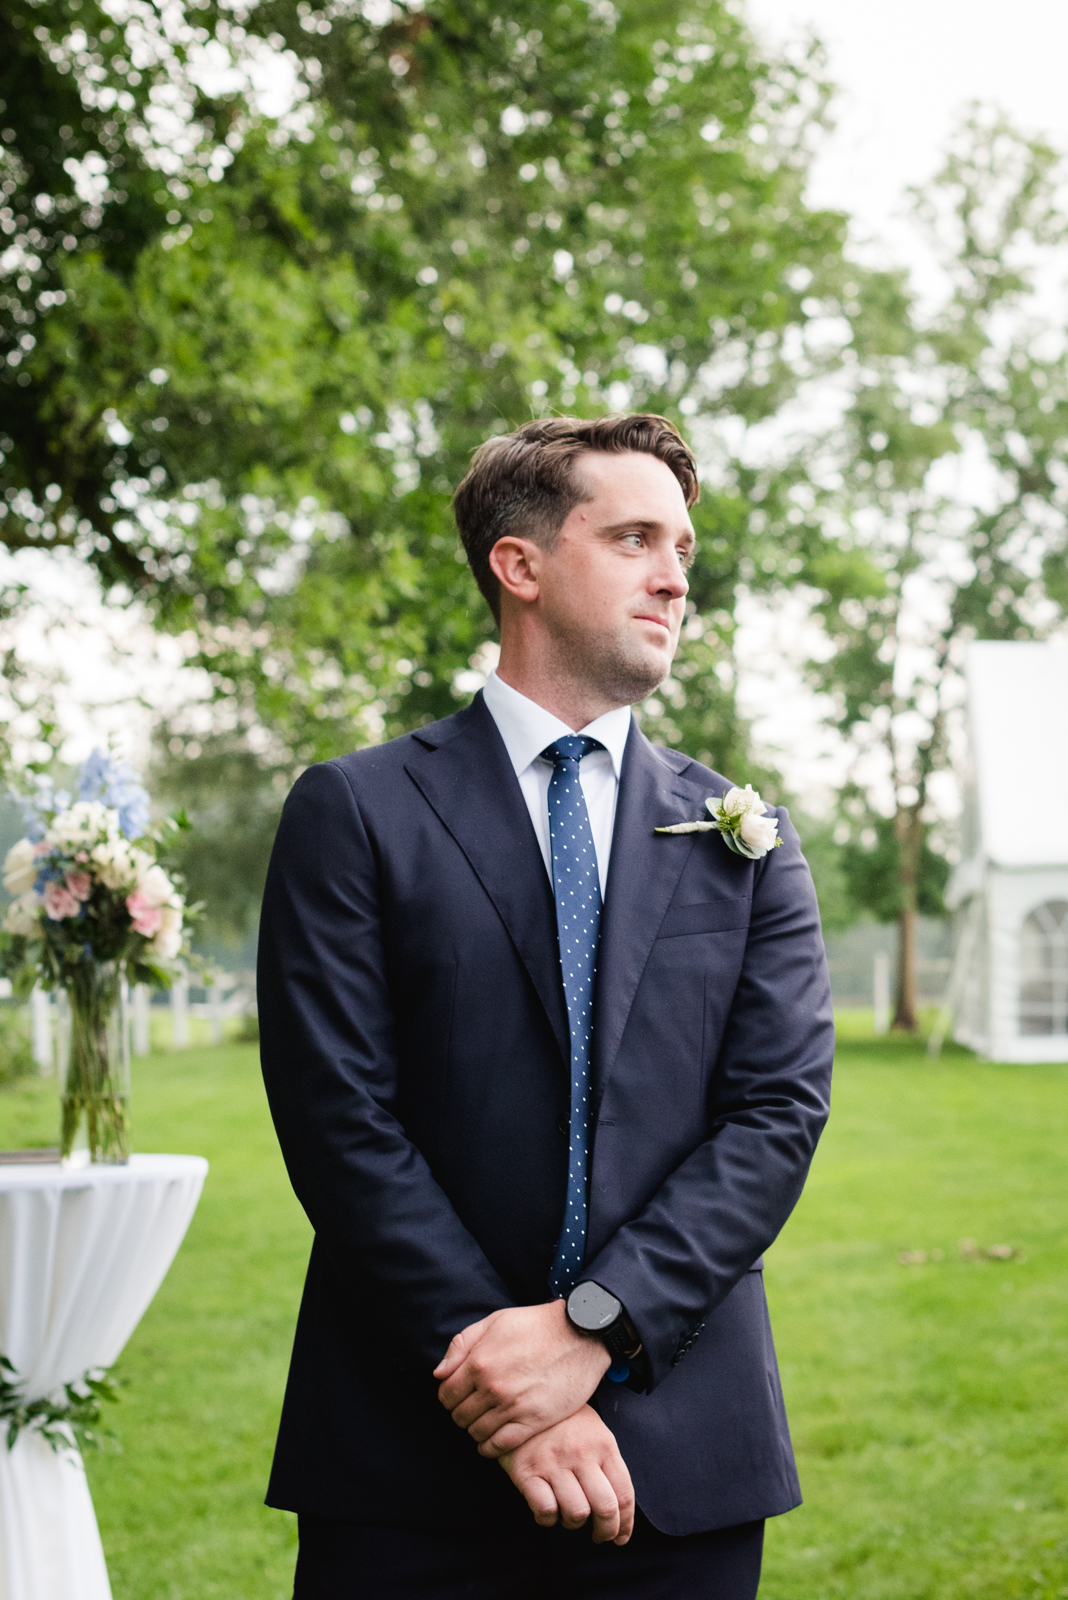 groom seeing bride for the first time during wedding ceremony